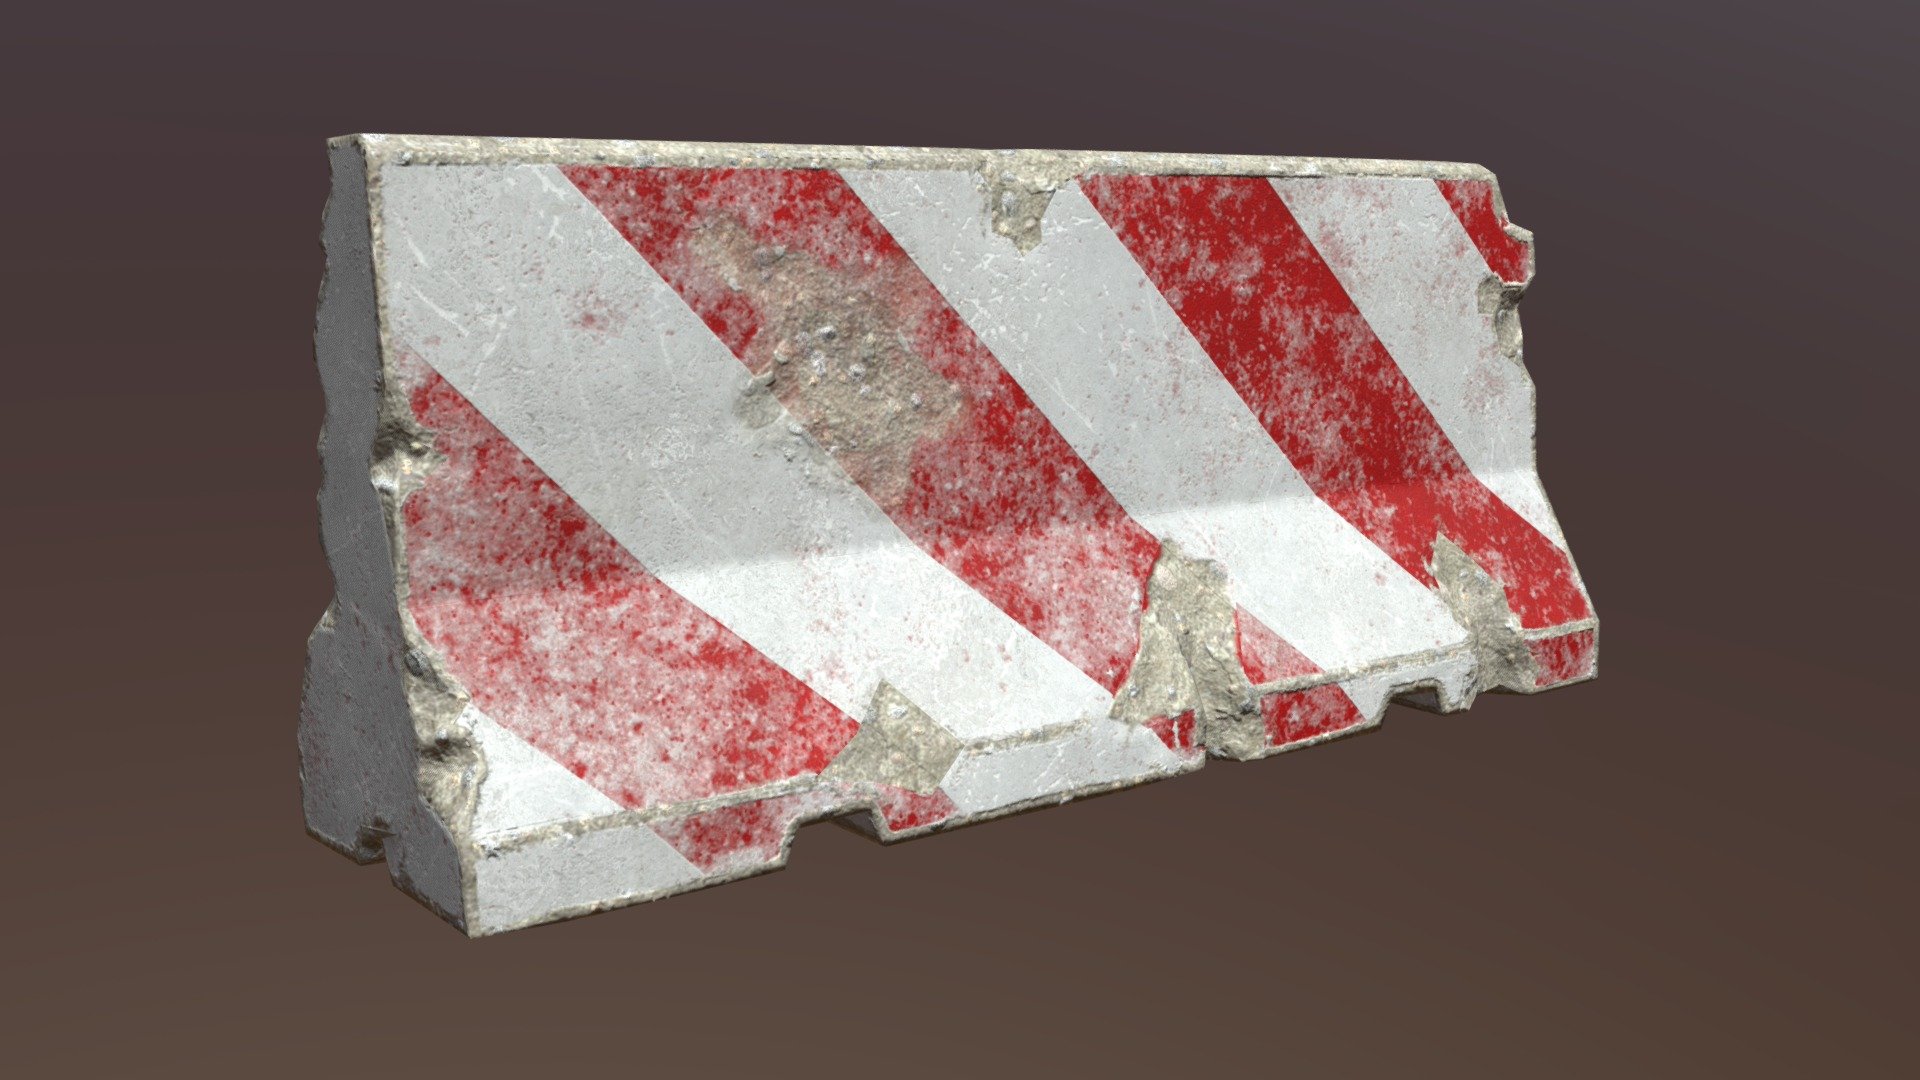 Road barrier block
Low poly model
Gameready
Totally unwrapped
PBR texture set
Suitable for outdoor cities &amp; military barricades scenes - Road Block - 3D model by BatoSole 3d model